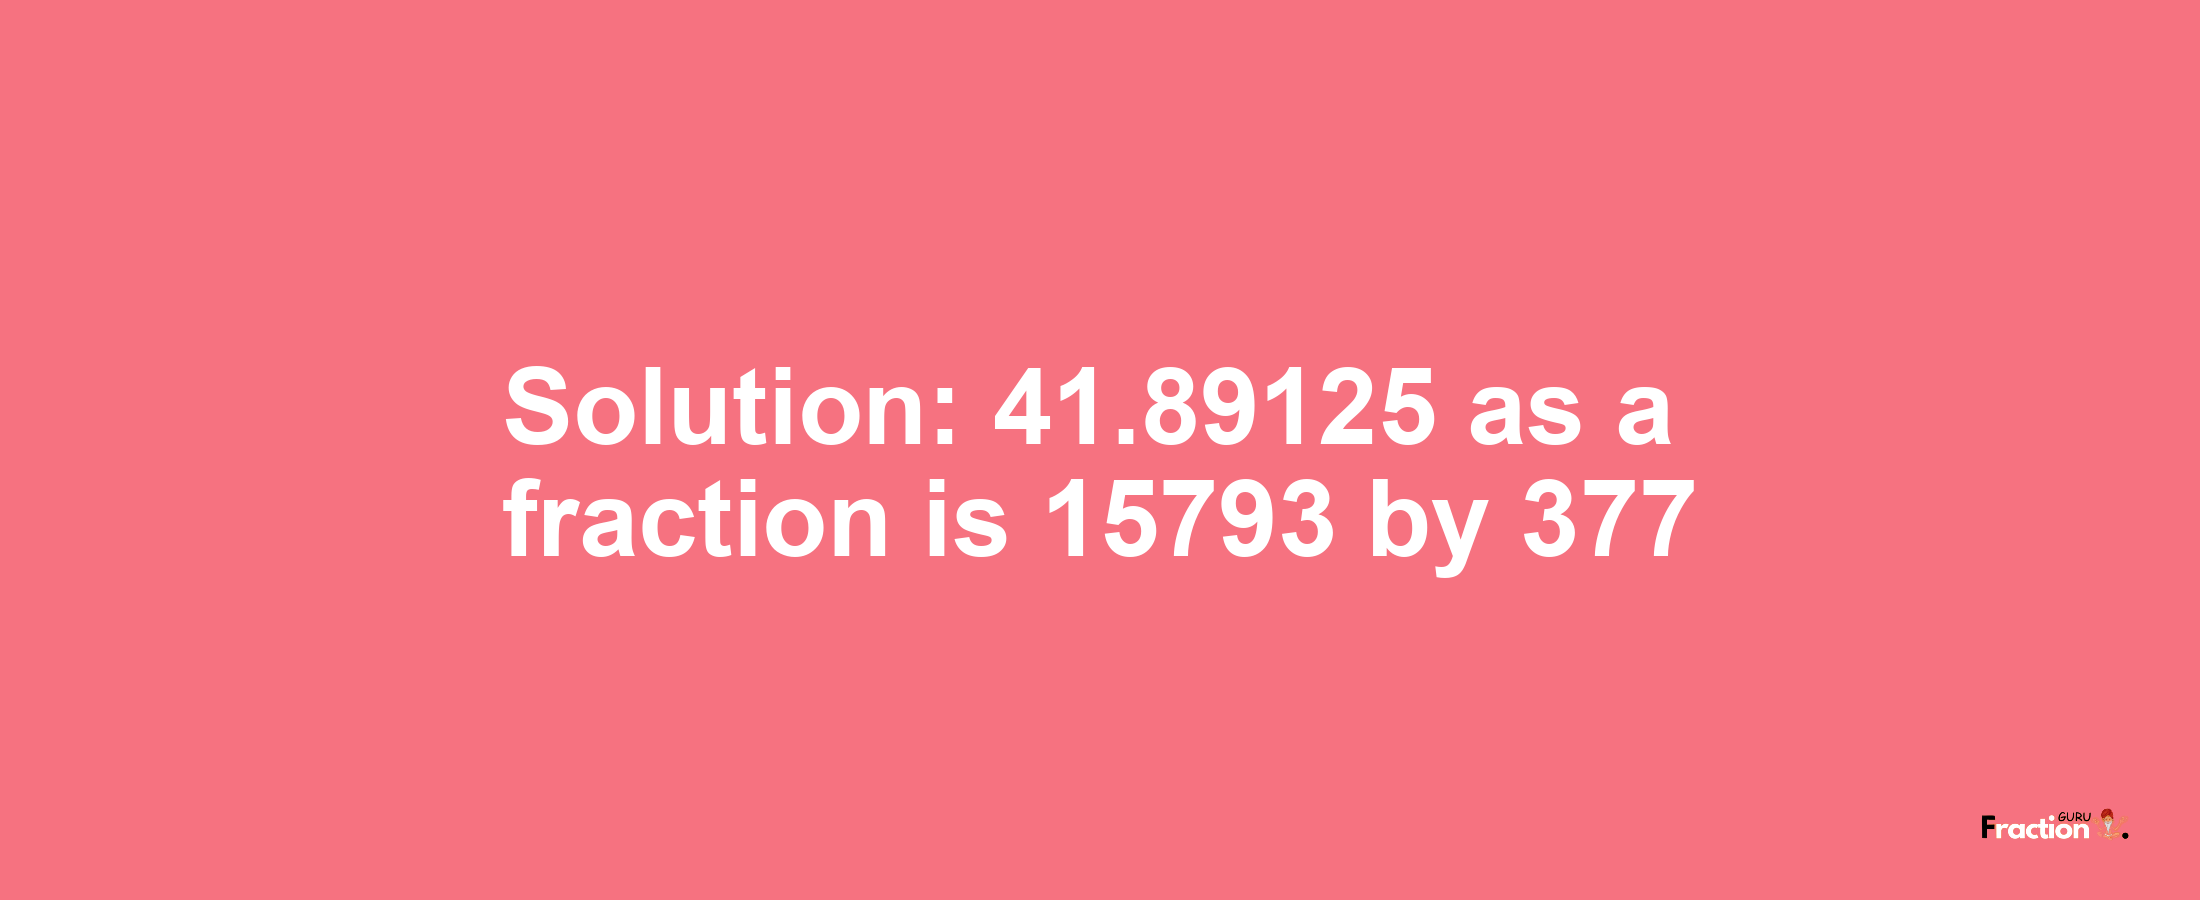 Solution:41.89125 as a fraction is 15793/377